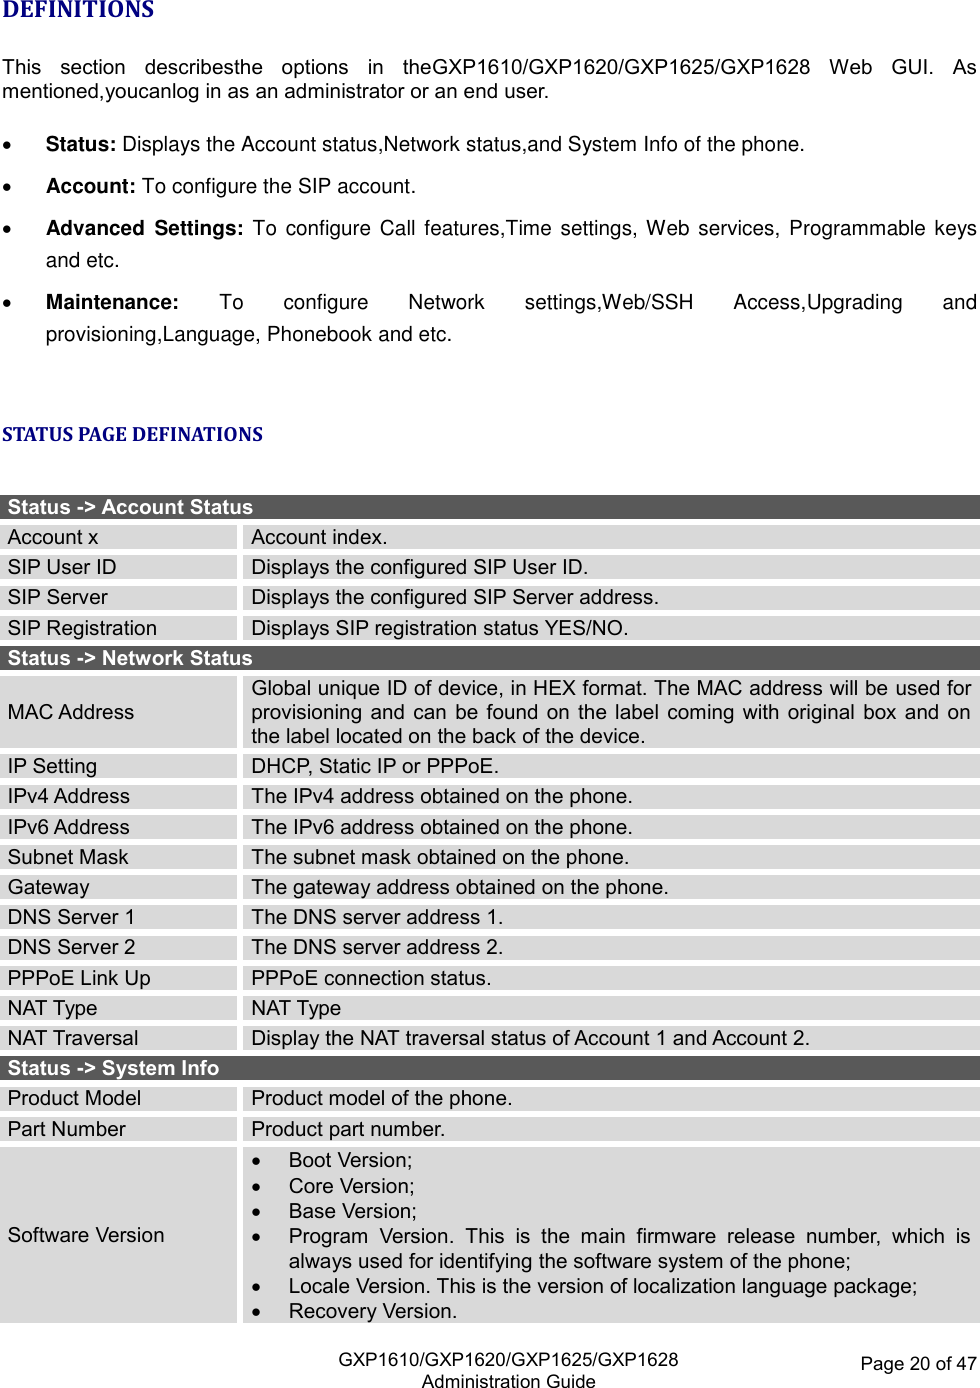   GXP1610/GXP1620/GXP1625/GXP1628Administration Guide Page 20 of 47  DEFINITIONS  This  section  describesthe  options  in  theGXP1610/GXP1620/GXP1625/GXP1628  Web  GUI.  As mentioned,youcanlog in as an administrator or an end user.   Status: Displays the Account status,Network status,and System Info of the phone.  Account: To configure the SIP account.  Advanced  Settings:  To configure  Call features,Time settings, Web services, Programmable  keys and etc.  Maintenance:  To  configure  Network  settings,Web/SSH  Access,Upgrading  and provisioning,Language, Phonebook and etc.  STATUS PAGE DEFINATIONS  Status -&gt; Account Status Account x Account index. SIP User ID Displays the configured SIP User ID. SIP Server Displays the configured SIP Server address. SIP Registration Displays SIP registration status YES/NO. Status -&gt; Network Status MAC Address Global unique ID of device, in HEX format. The MAC address will be used for provisioning  and can  be  found  on  the label  coming  with  original box  and  on the label located on the back of the device. IP Setting DHCP, Static IP or PPPoE. IPv4 Address The IPv4 address obtained on the phone. IPv6 Address The IPv6 address obtained on the phone. Subnet Mask The subnet mask obtained on the phone. Gateway The gateway address obtained on the phone. DNS Server 1 The DNS server address 1. DNS Server 2 The DNS server address 2. PPPoE Link Up PPPoE connection status. NAT Type NAT Type NAT Traversal Display the NAT traversal status of Account 1 and Account 2. Status -&gt; System Info Product Model Product model of the phone. Part Number Product part number. Software Version  Boot Version;  Core Version;  Base Version;  Program  Version.  This  is  the  main  firmware  release  number,  which  is always used for identifying the software system of the phone;  Locale Version. This is the version of localization language package;  Recovery Version. 